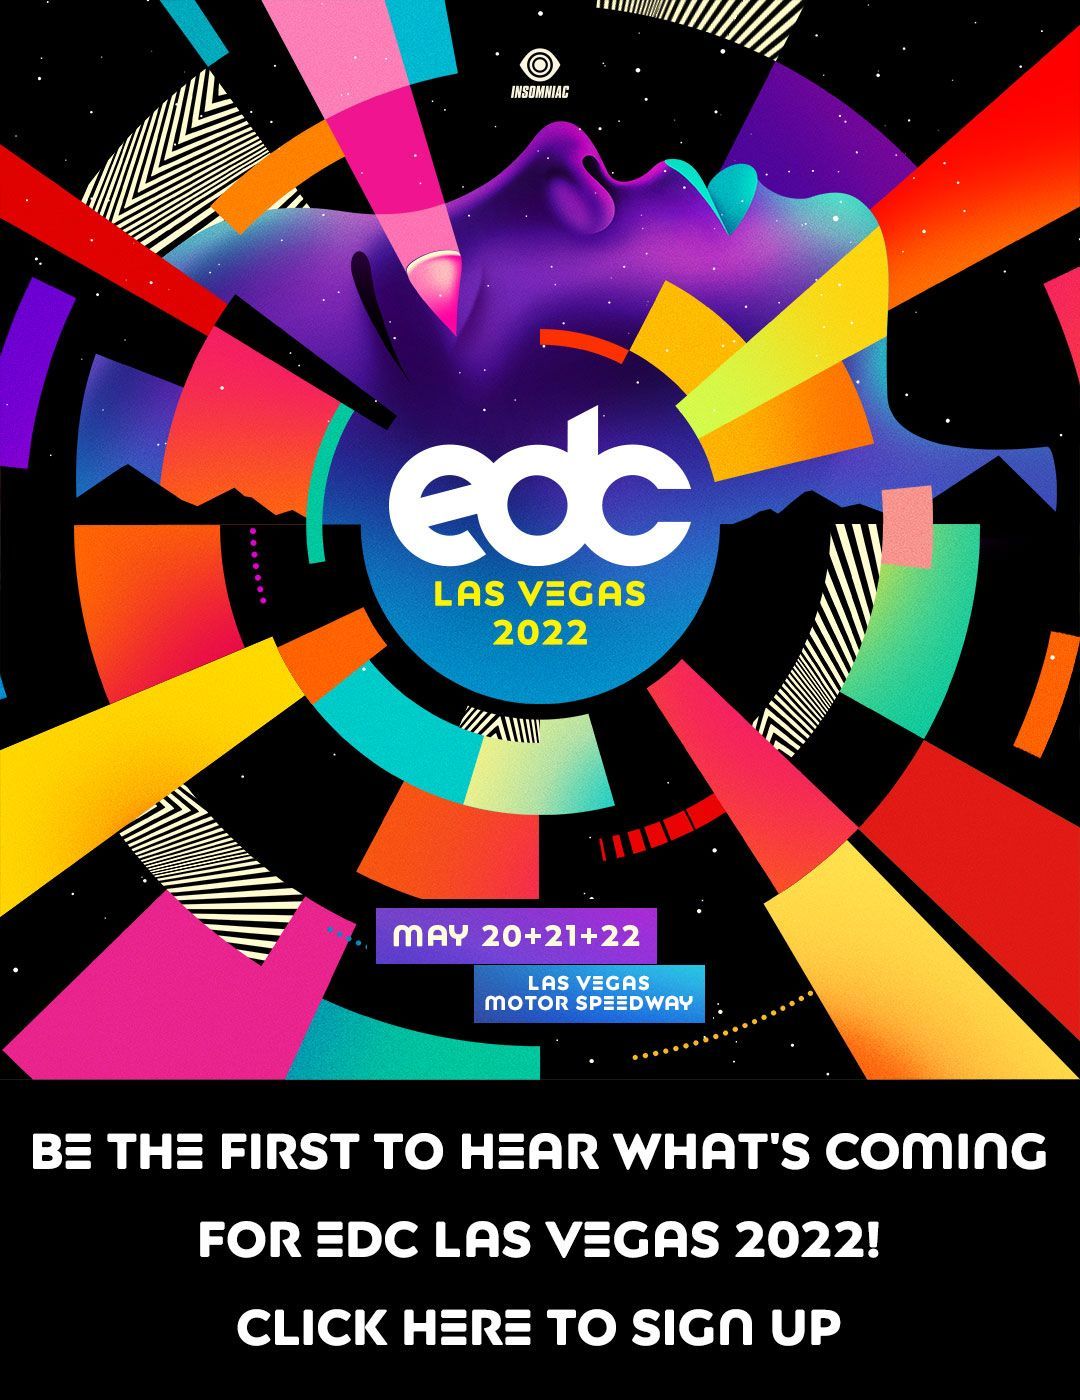 Electric Daisy Carnival EDC Las Vegas Shuttle Passes Only - 3 Day Pass